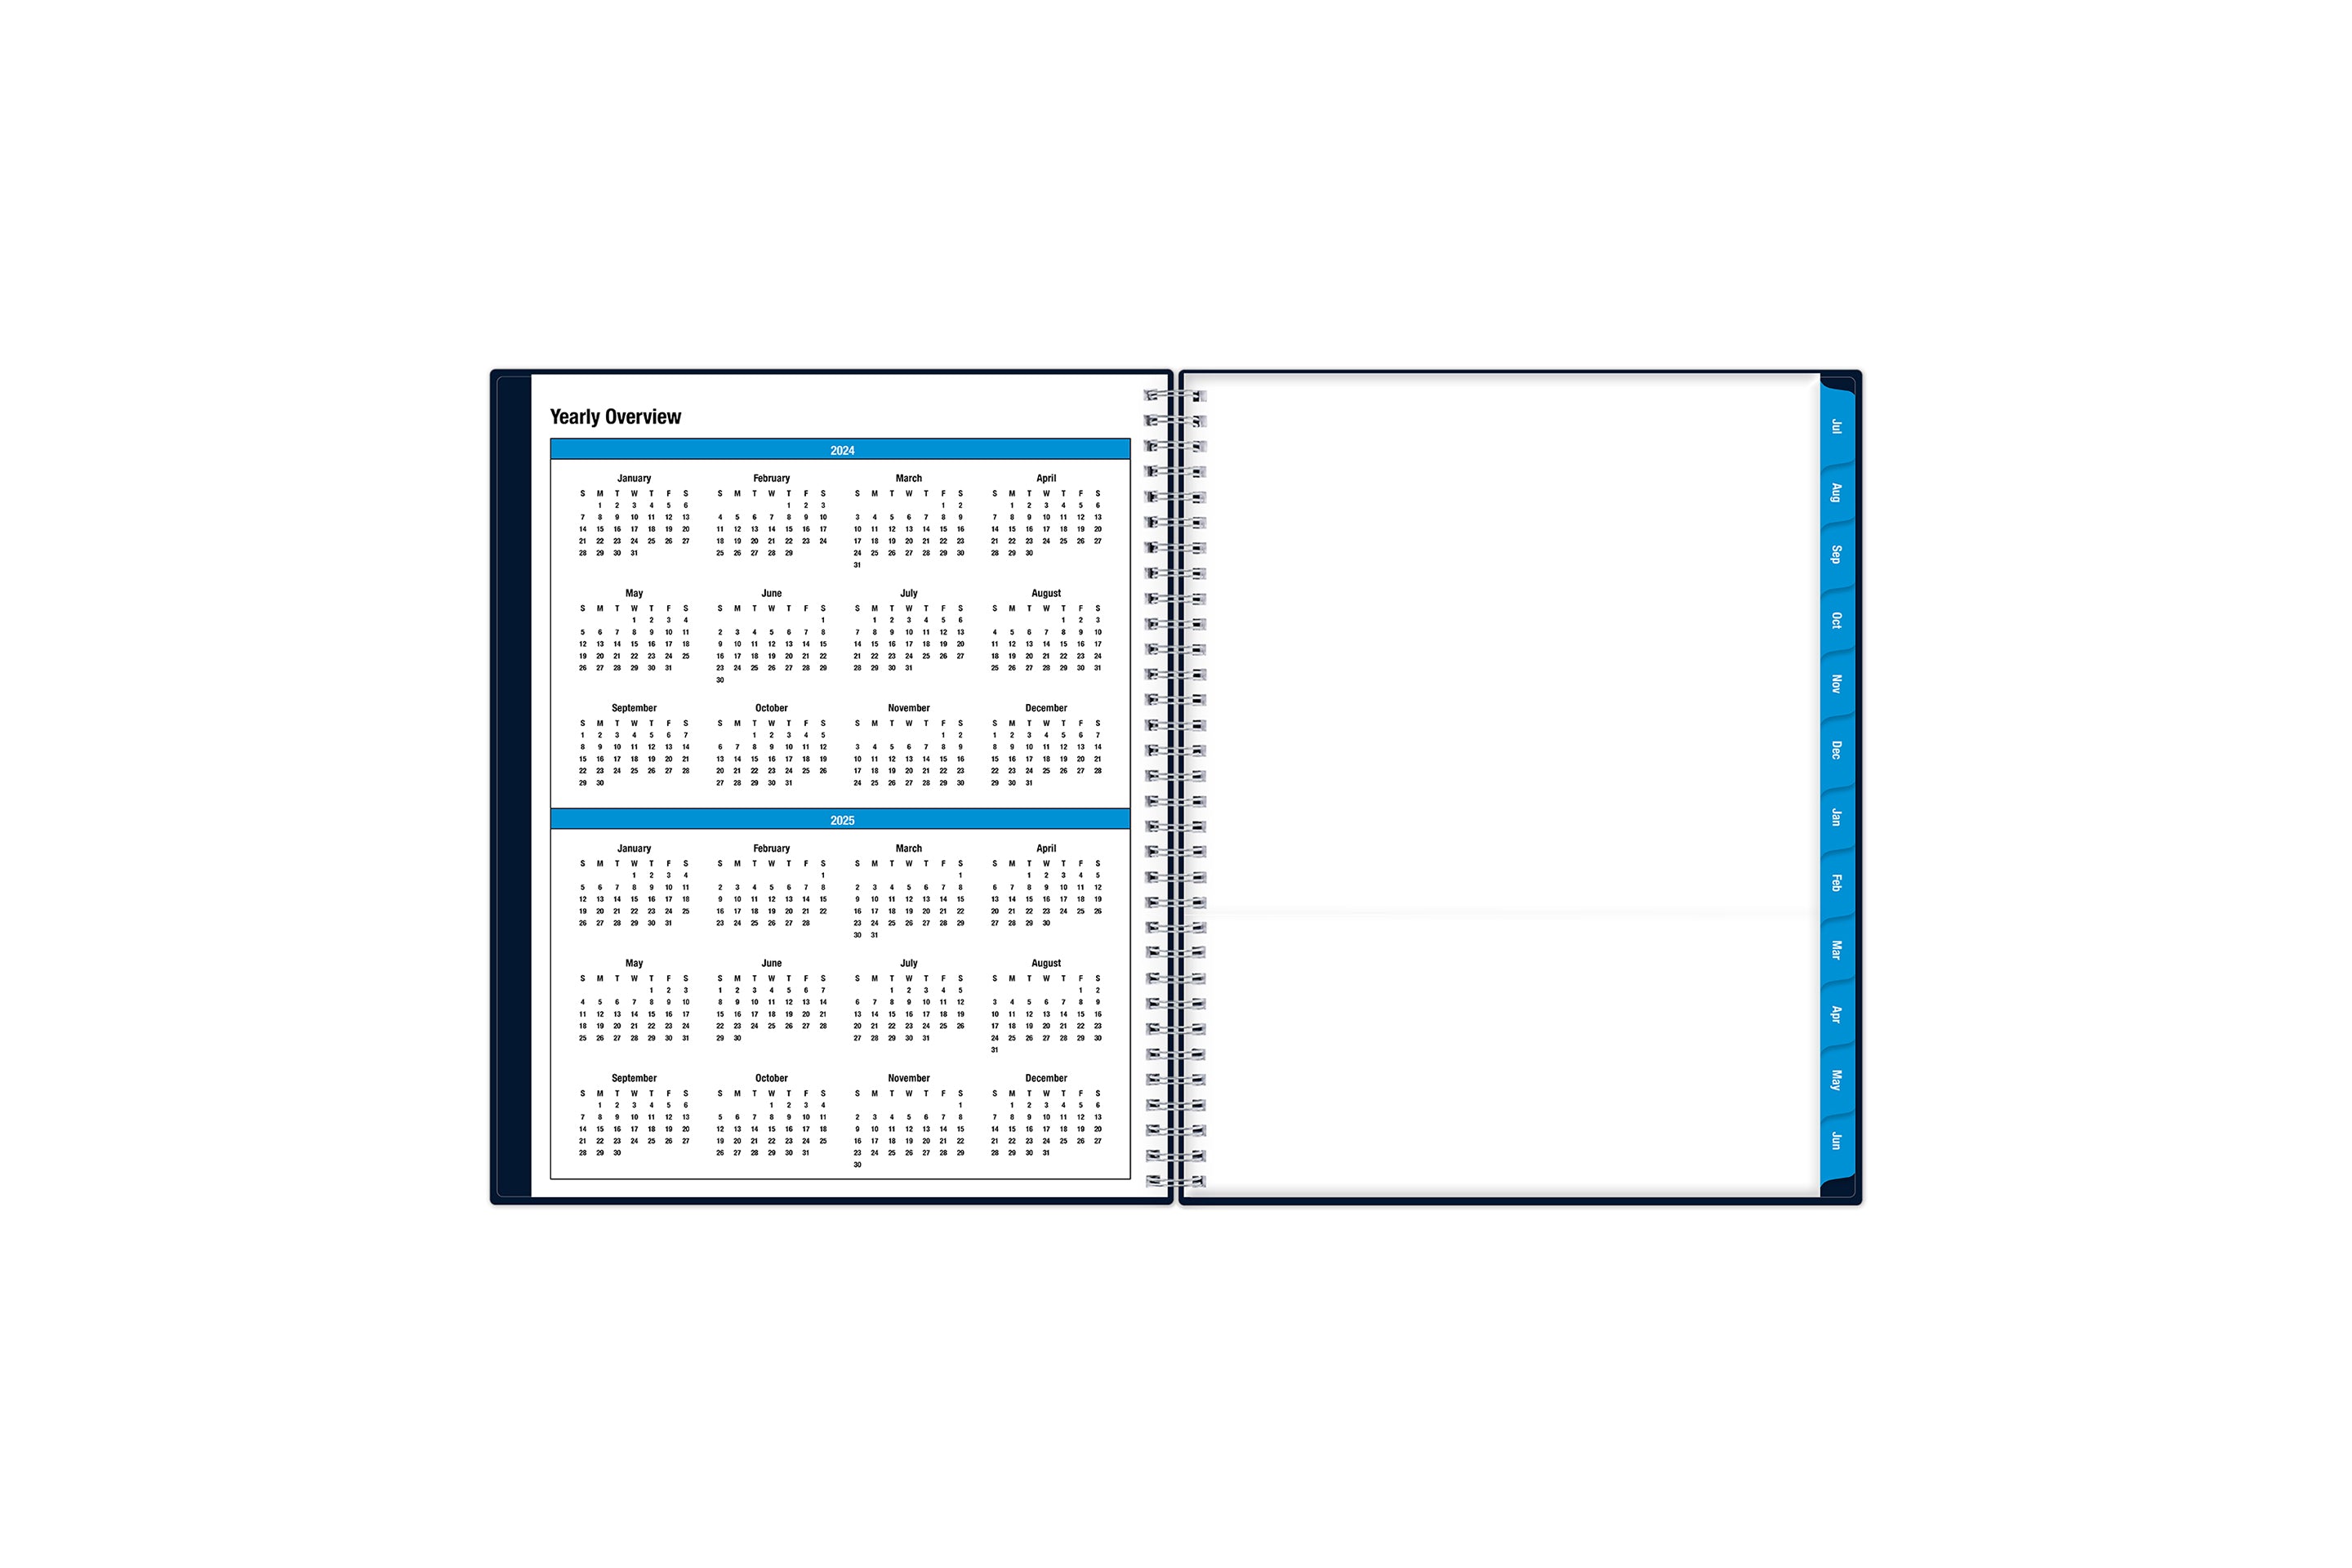  yearly overview reference calendars and owner information and yearly goals